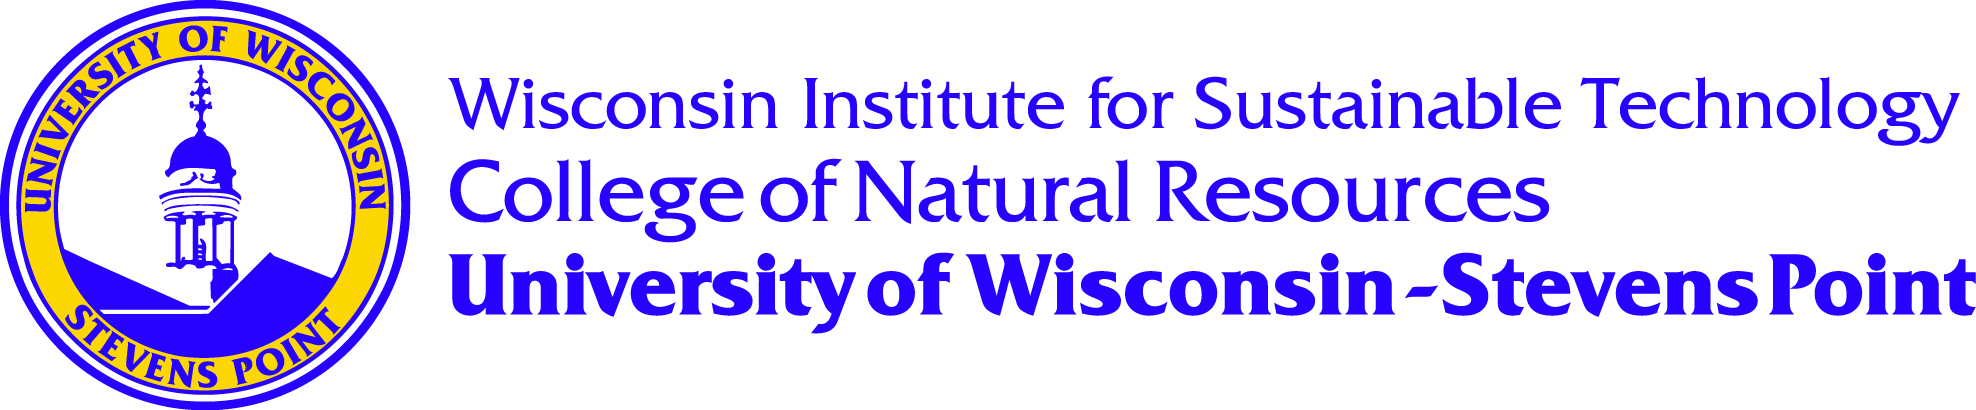 wisconsin-institute-for-sustainable-technology